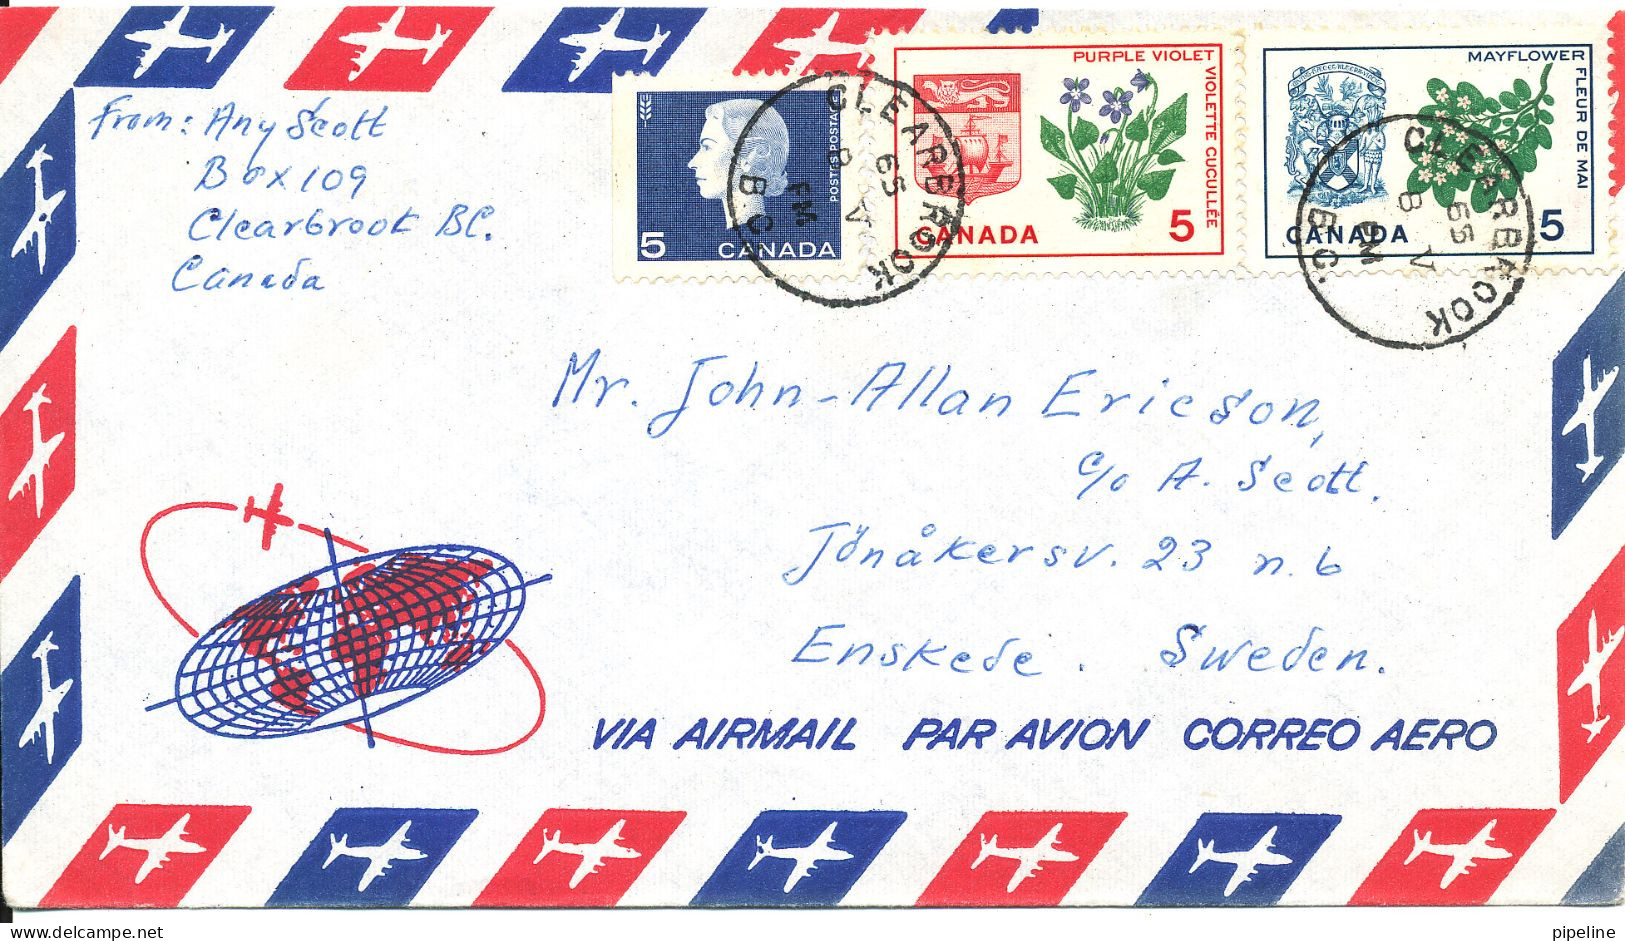 Canada Air Mail Cover Sent To Sweden 8-5-1965 - Luchtpost